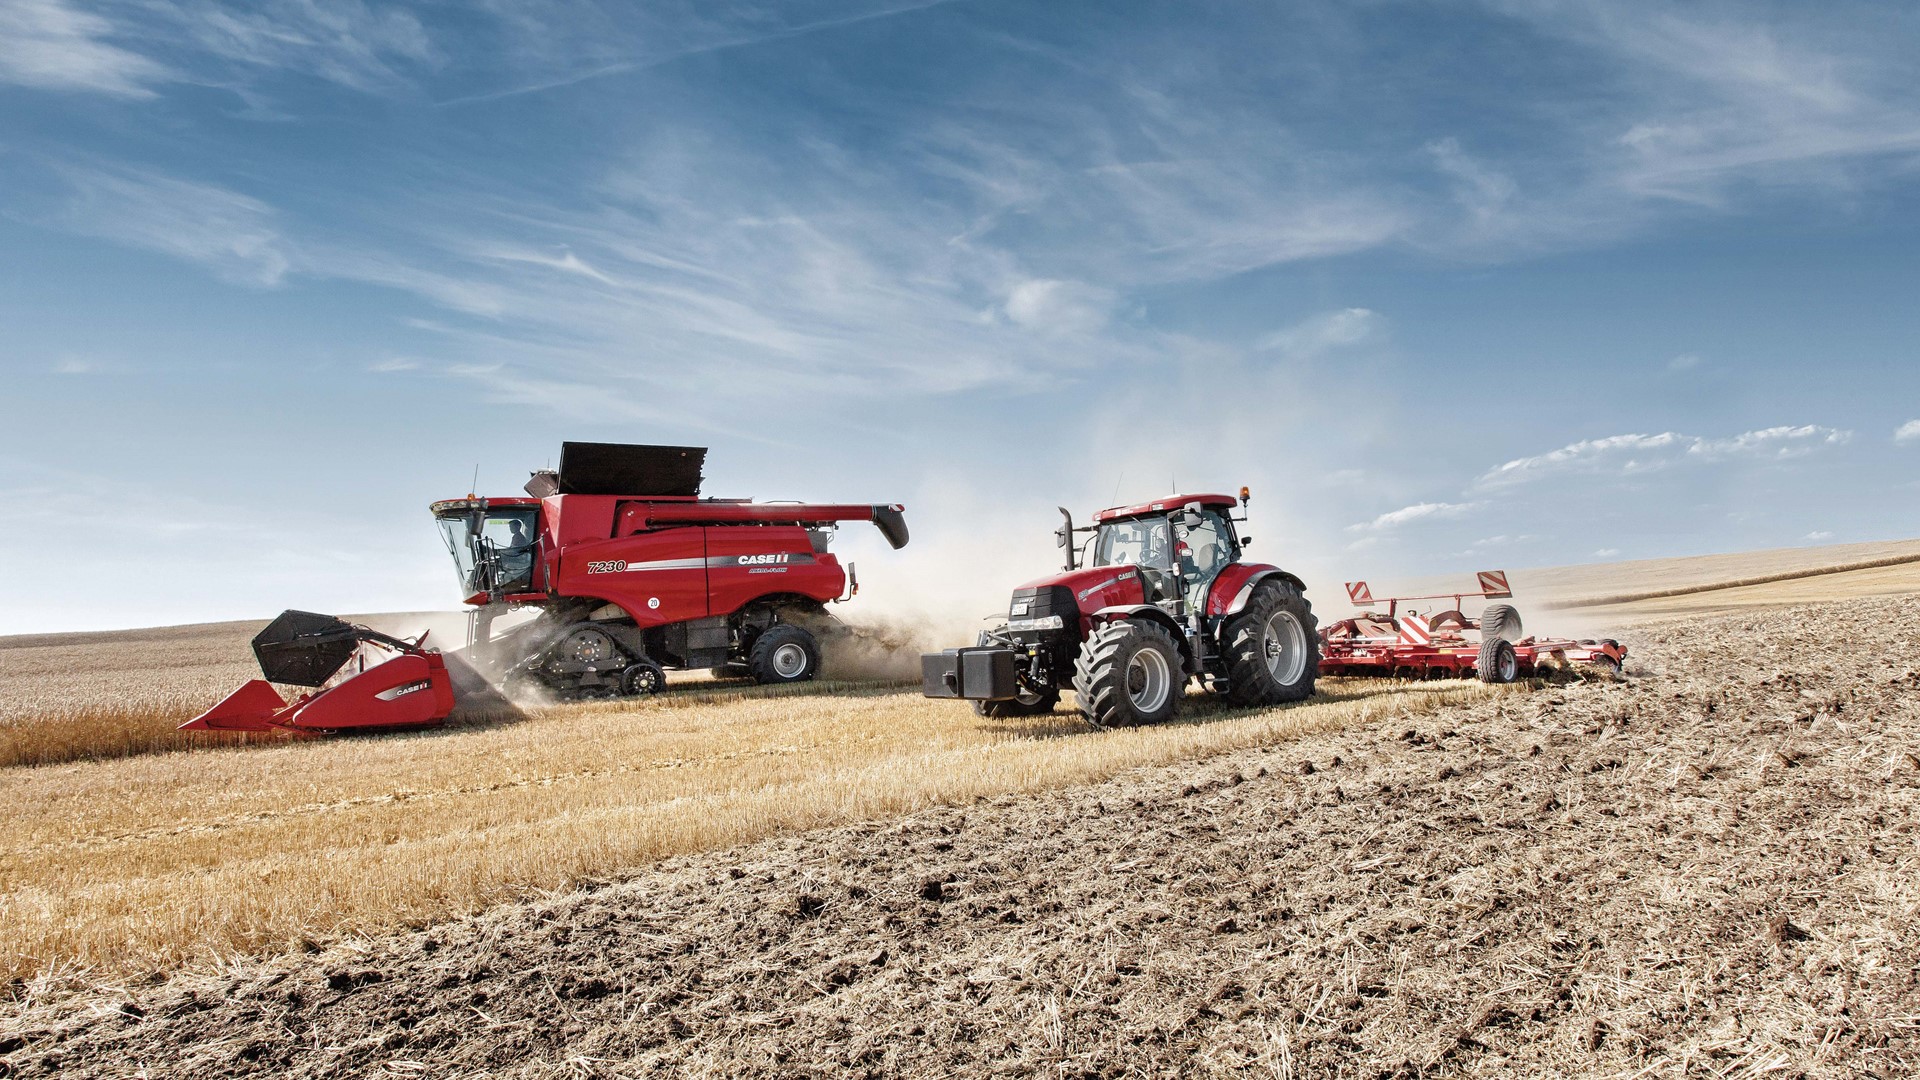 Case IH Axial Flow 7230 together with a Puma CVX conducting cultivation